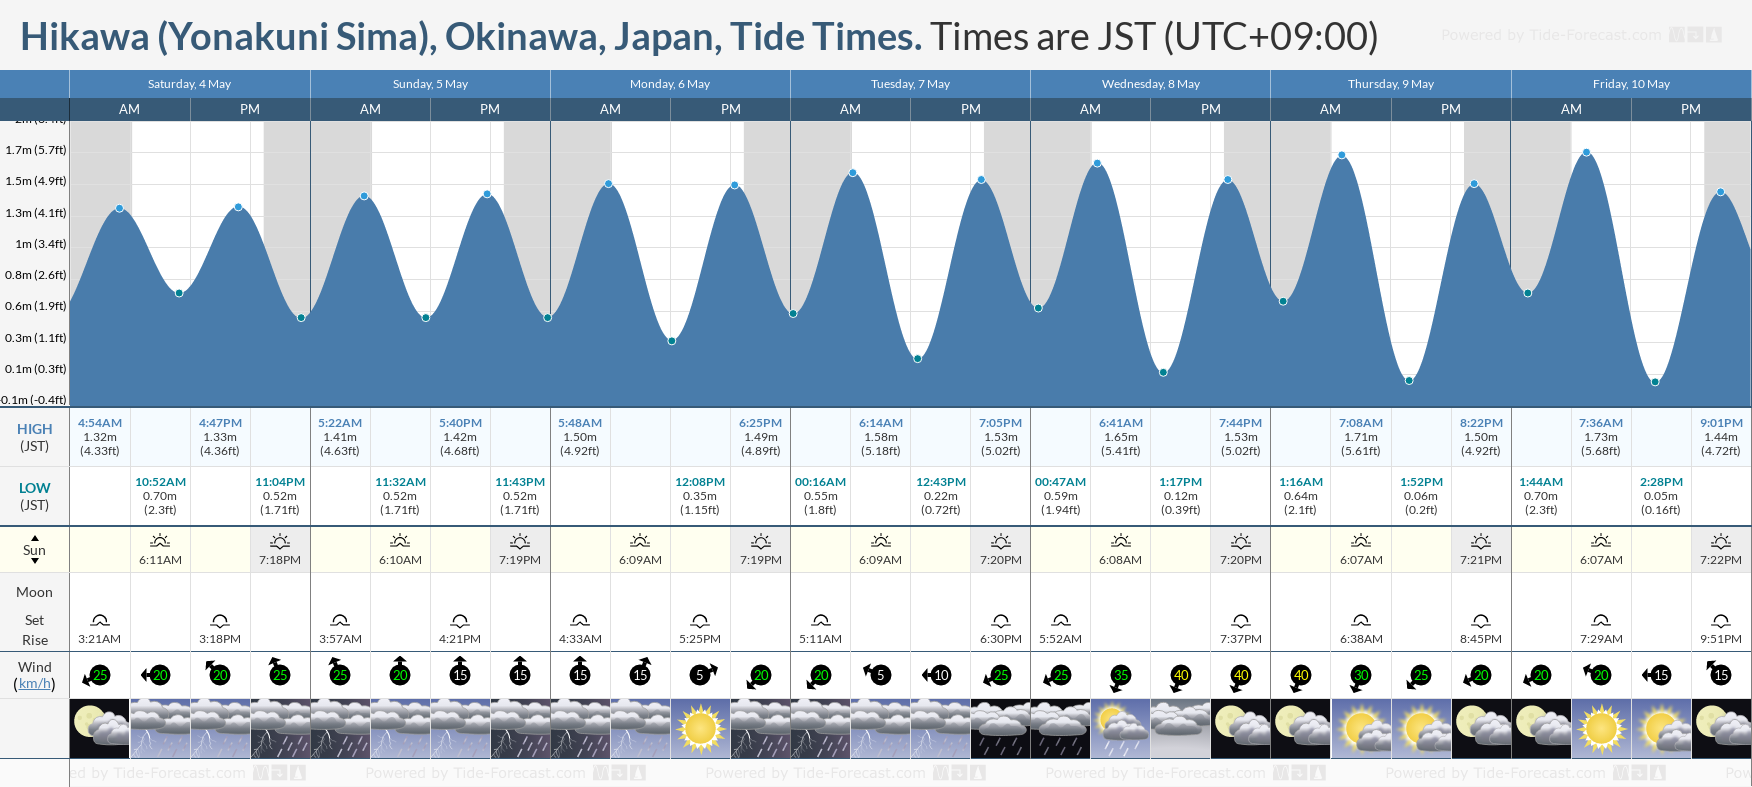 Hikawa (Yonakuni Sima), Okinawa, Japan Tide Chart including high and low tide tide times for the next 7 days